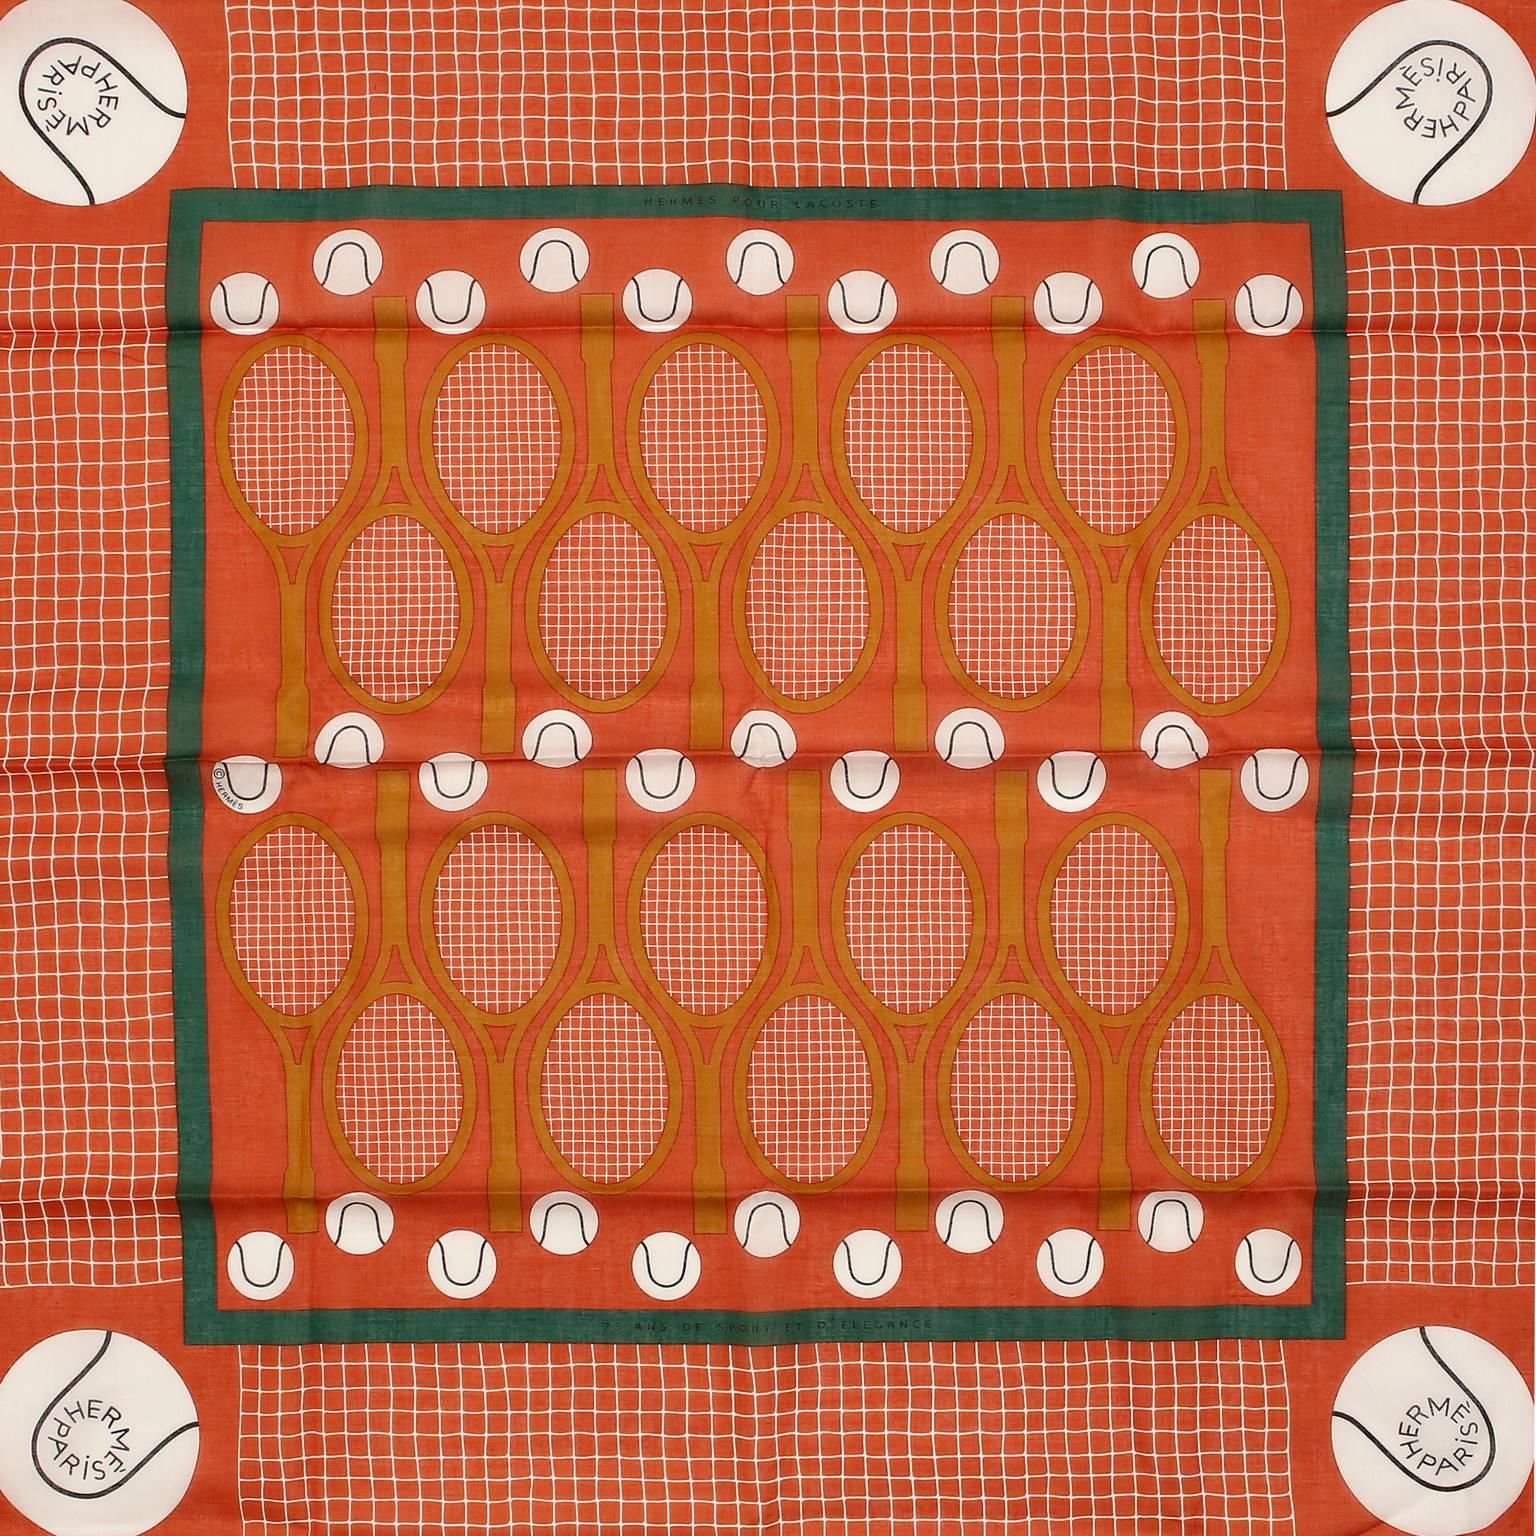 Hermès Tennis 70 cm Scarf- PRISTINE
  A limited edition, it was issued in 2008 to commemorate the 75th anniversary of Lacoste. 
Orange background with white “net” border and tennis rackets in the center.  Each corner has a white Hermès tennis ball. 